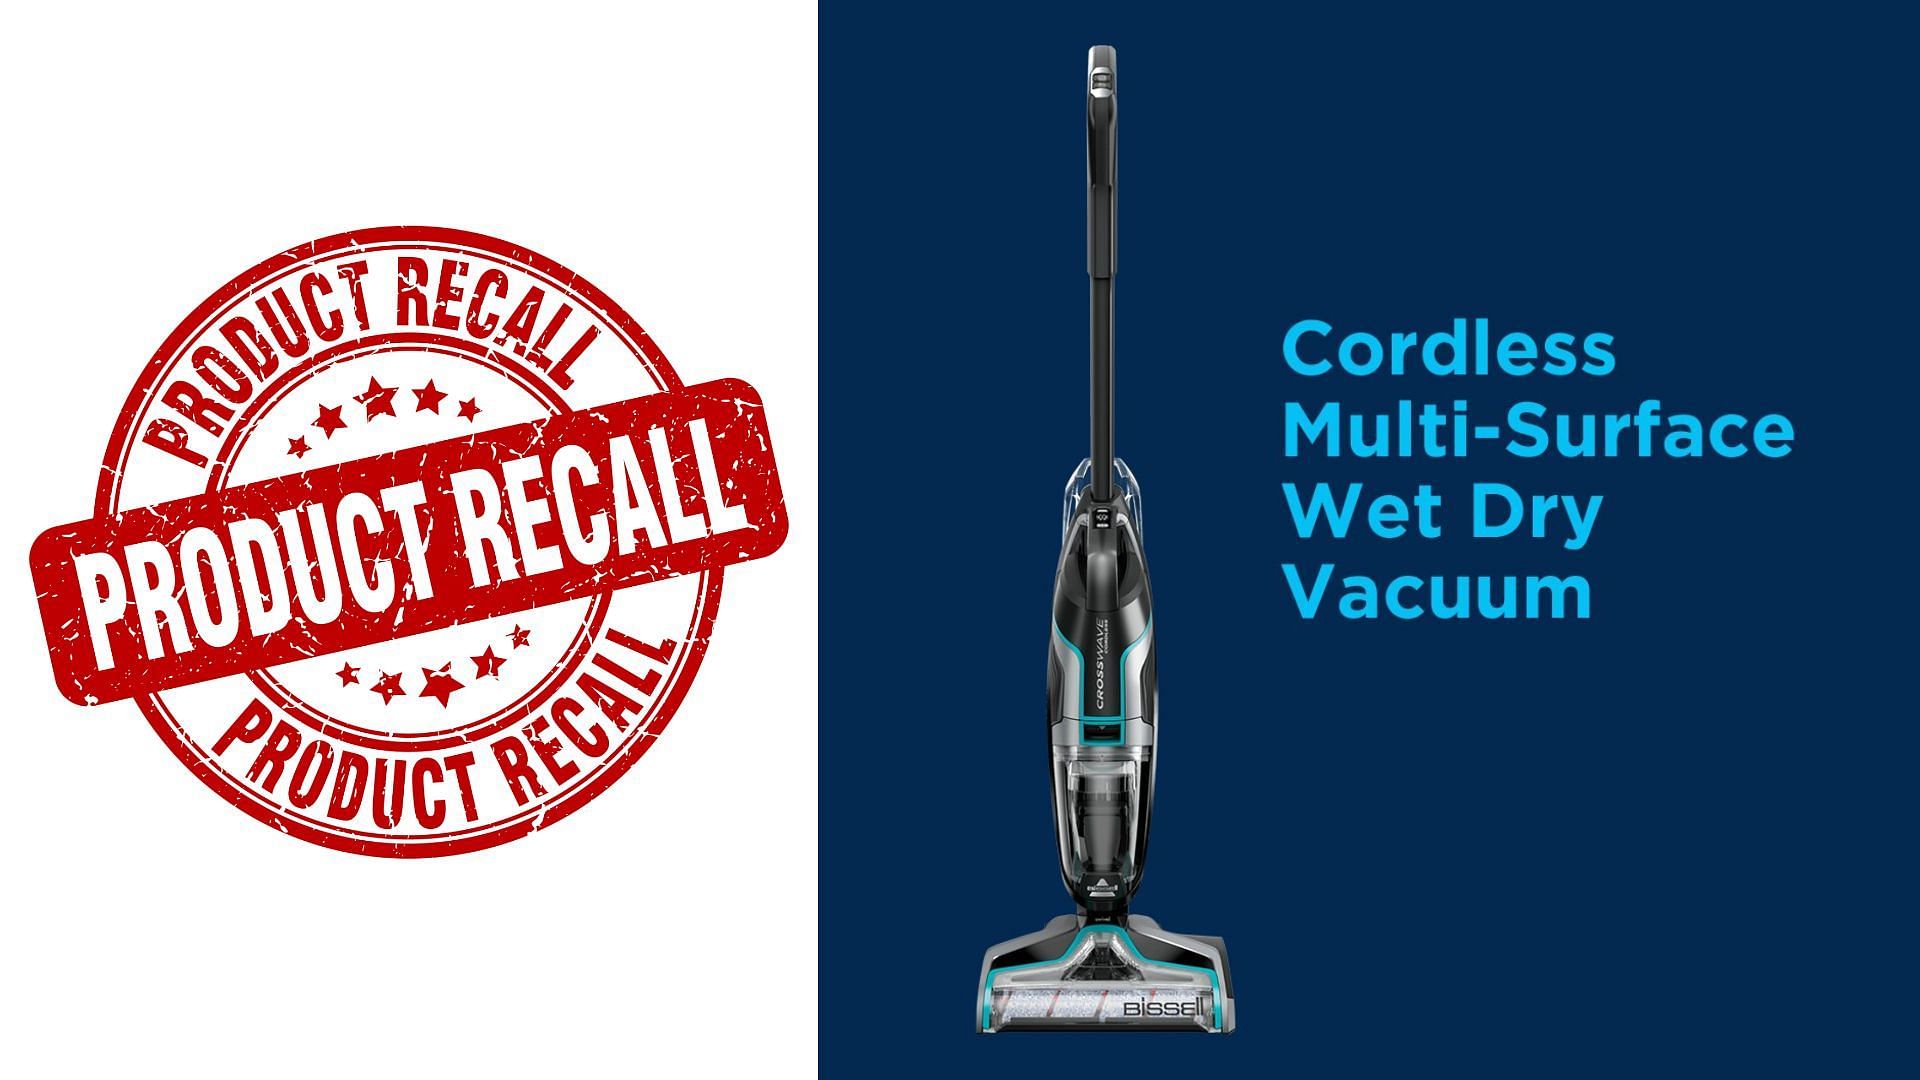 BISSELL recalls Cordless Multi-Surface Wet Dry Vacuums over fire hazard concerns (Image via BISSELL)